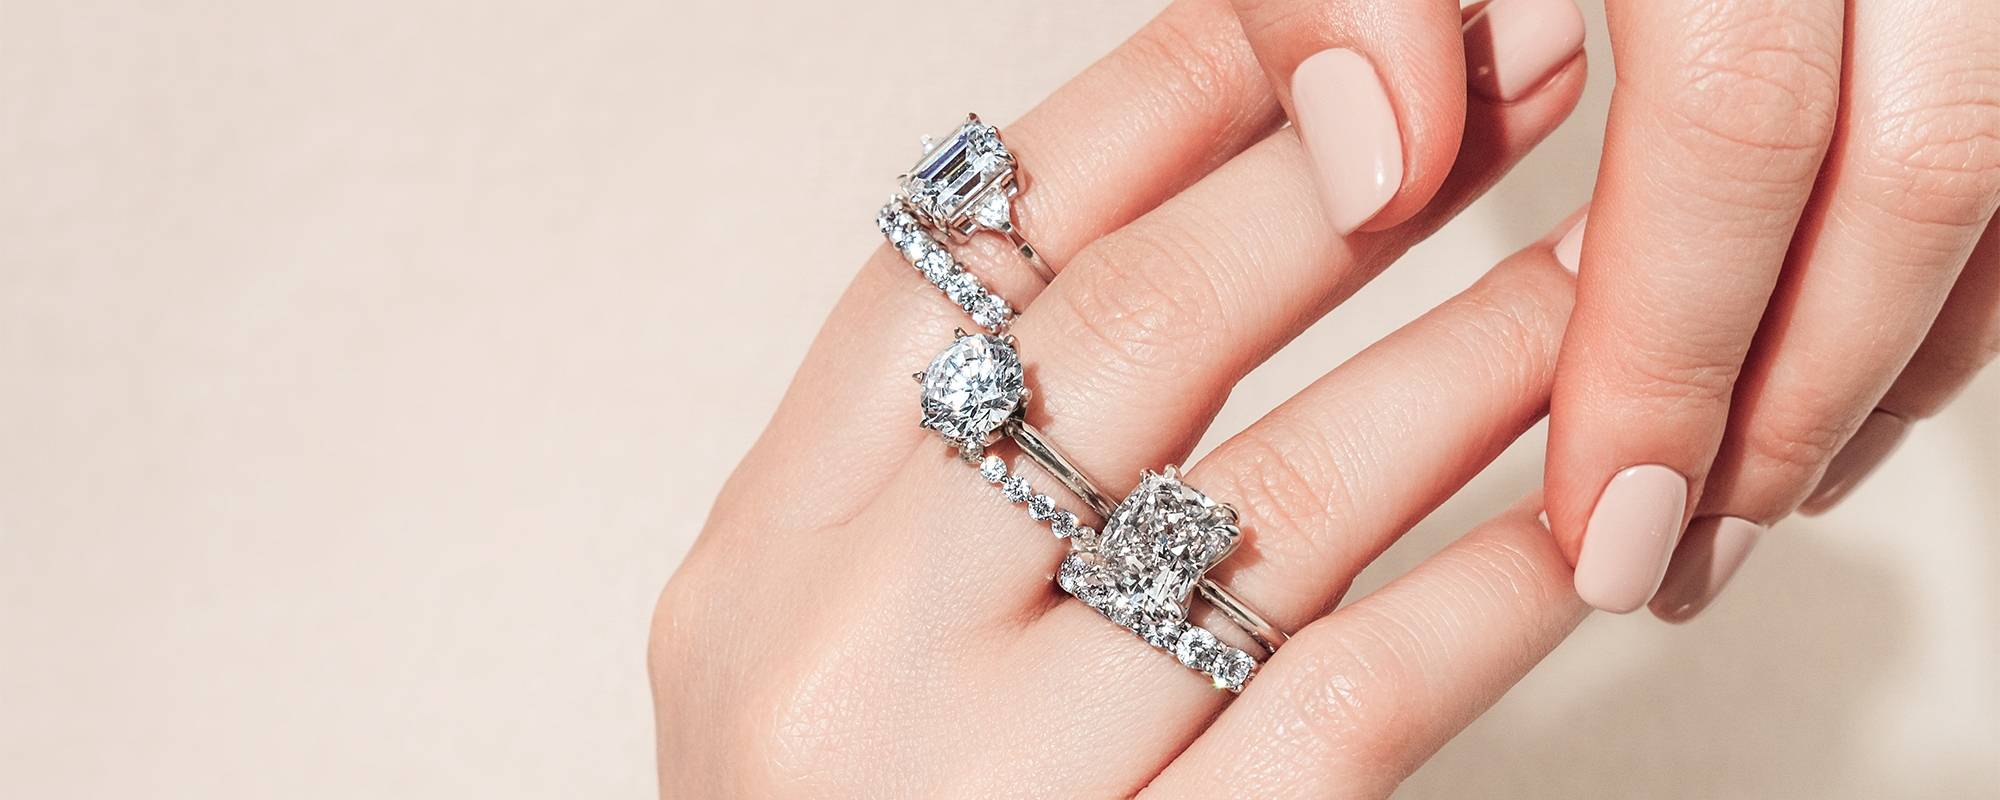 2023 Engagement Ring Predictions (According To Experts)